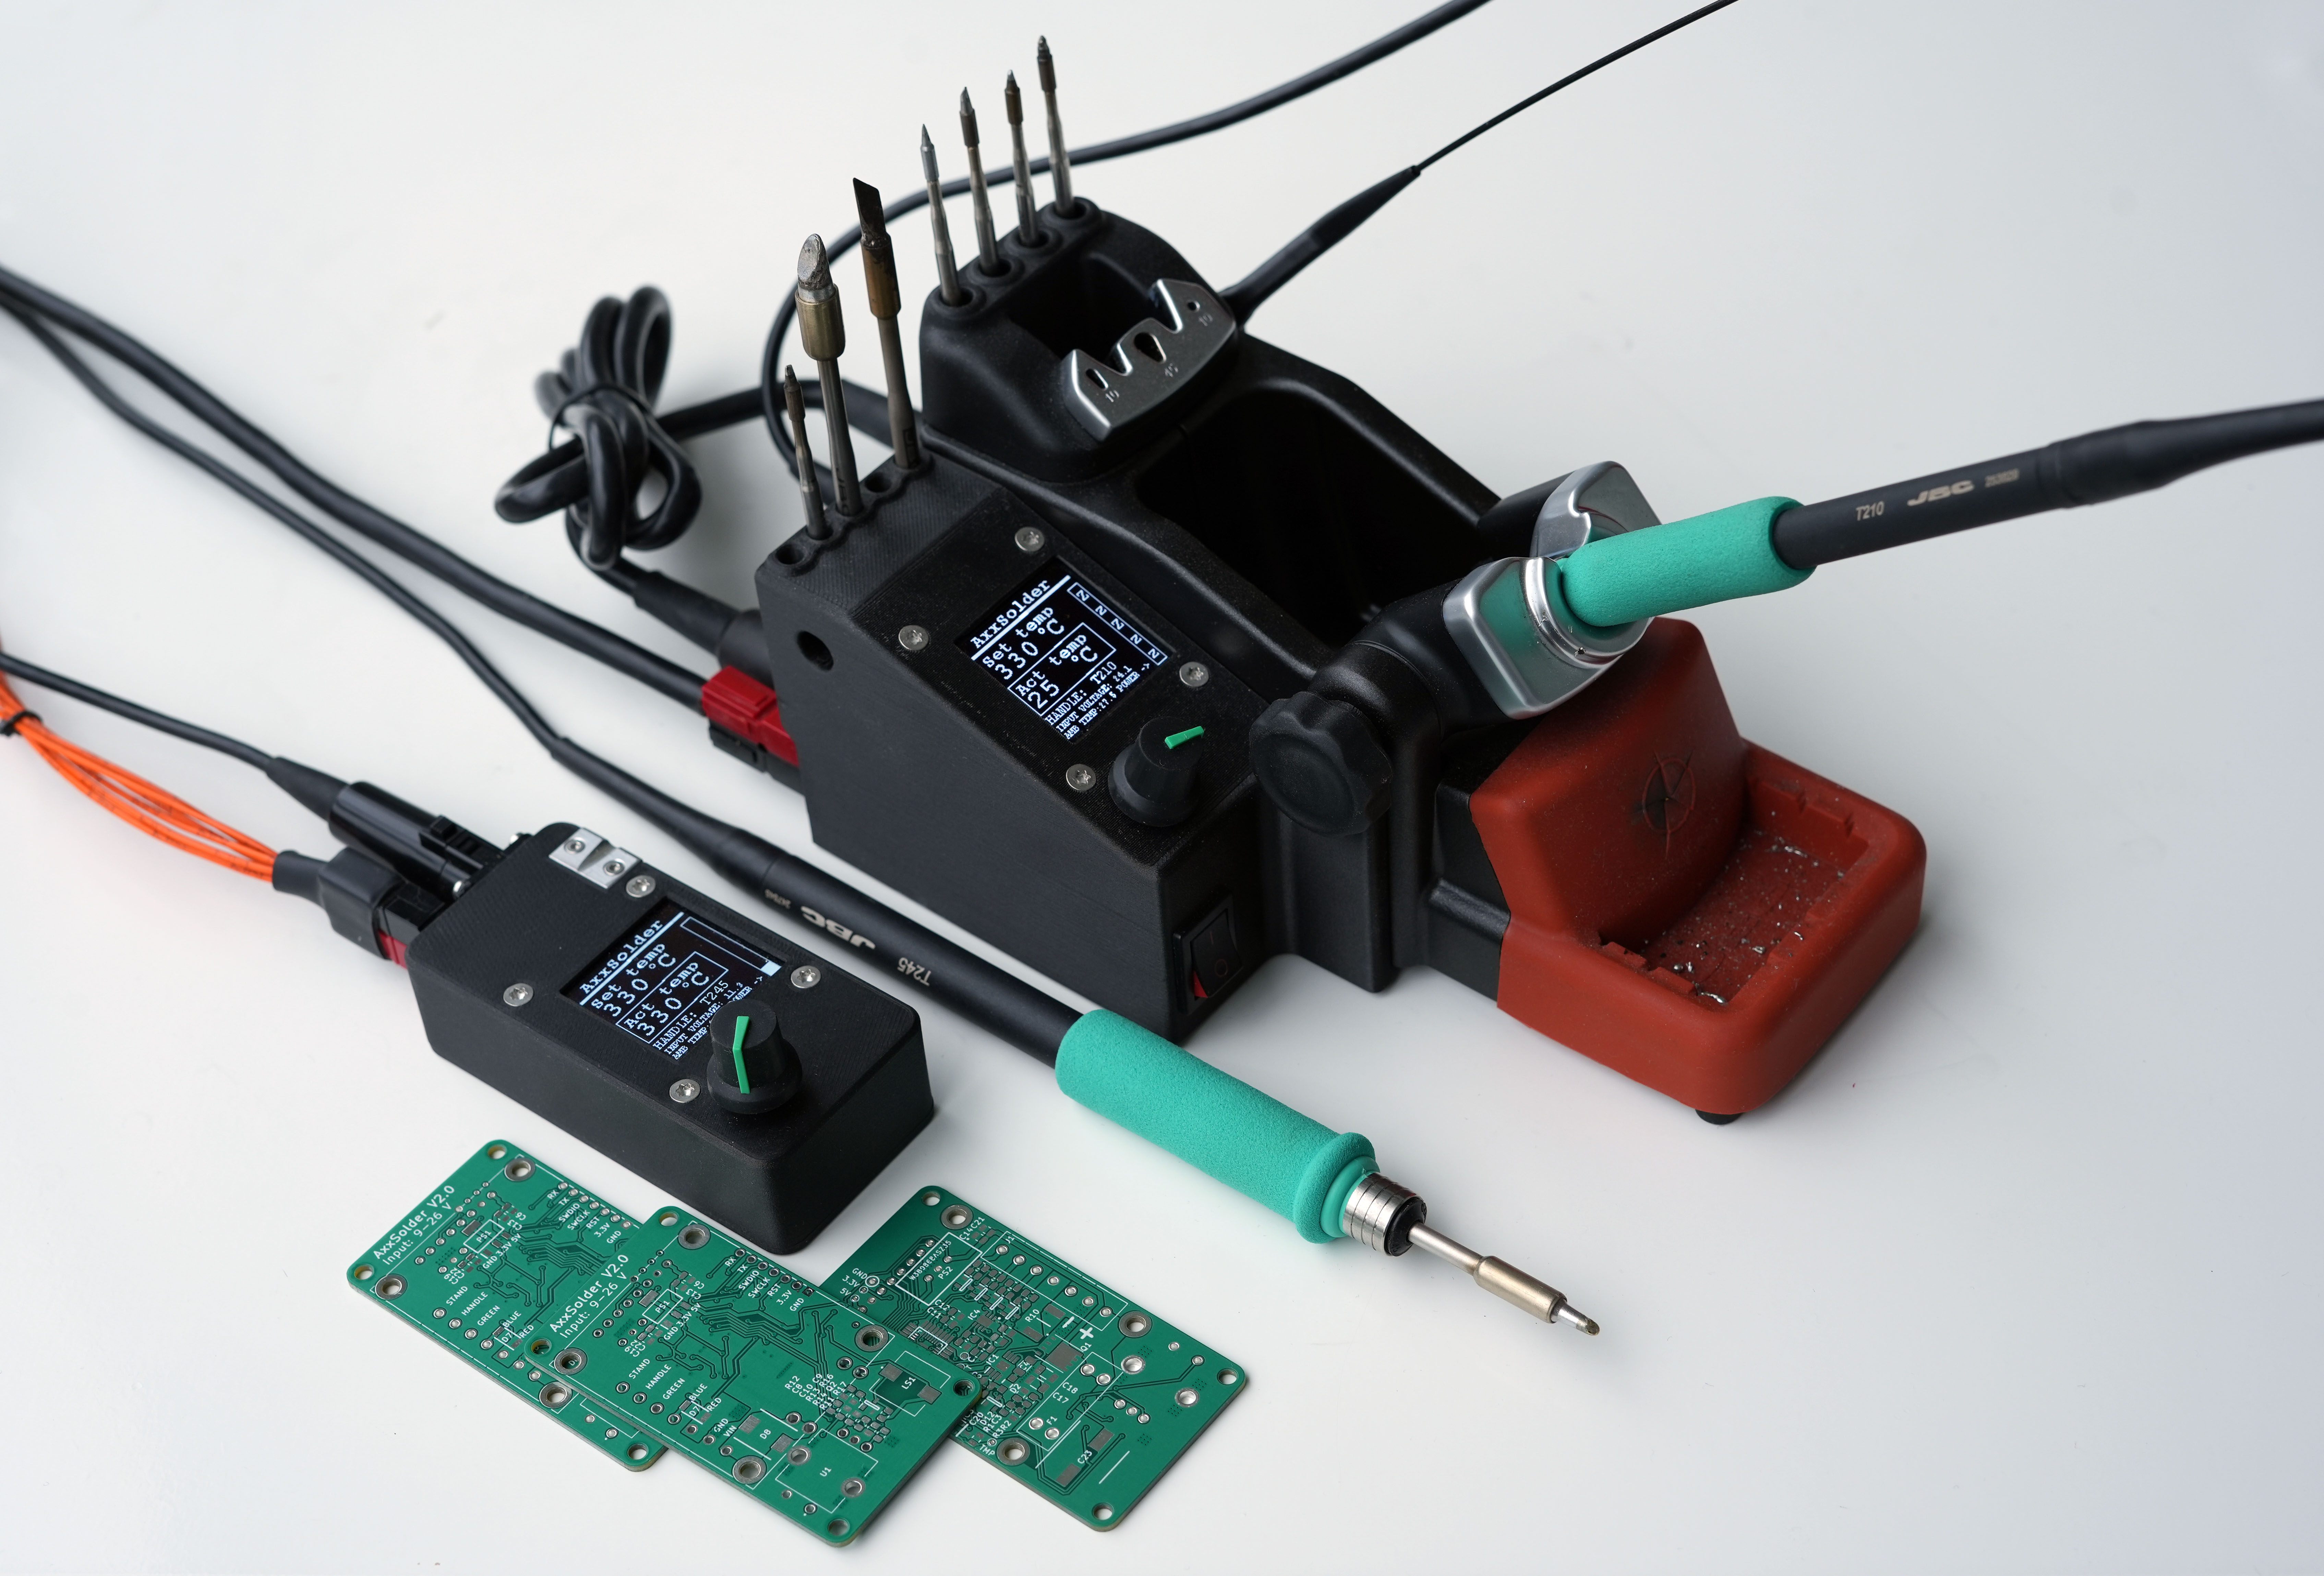 Why is JBC a Better Soldering Solution? Here are 10 Reasons.